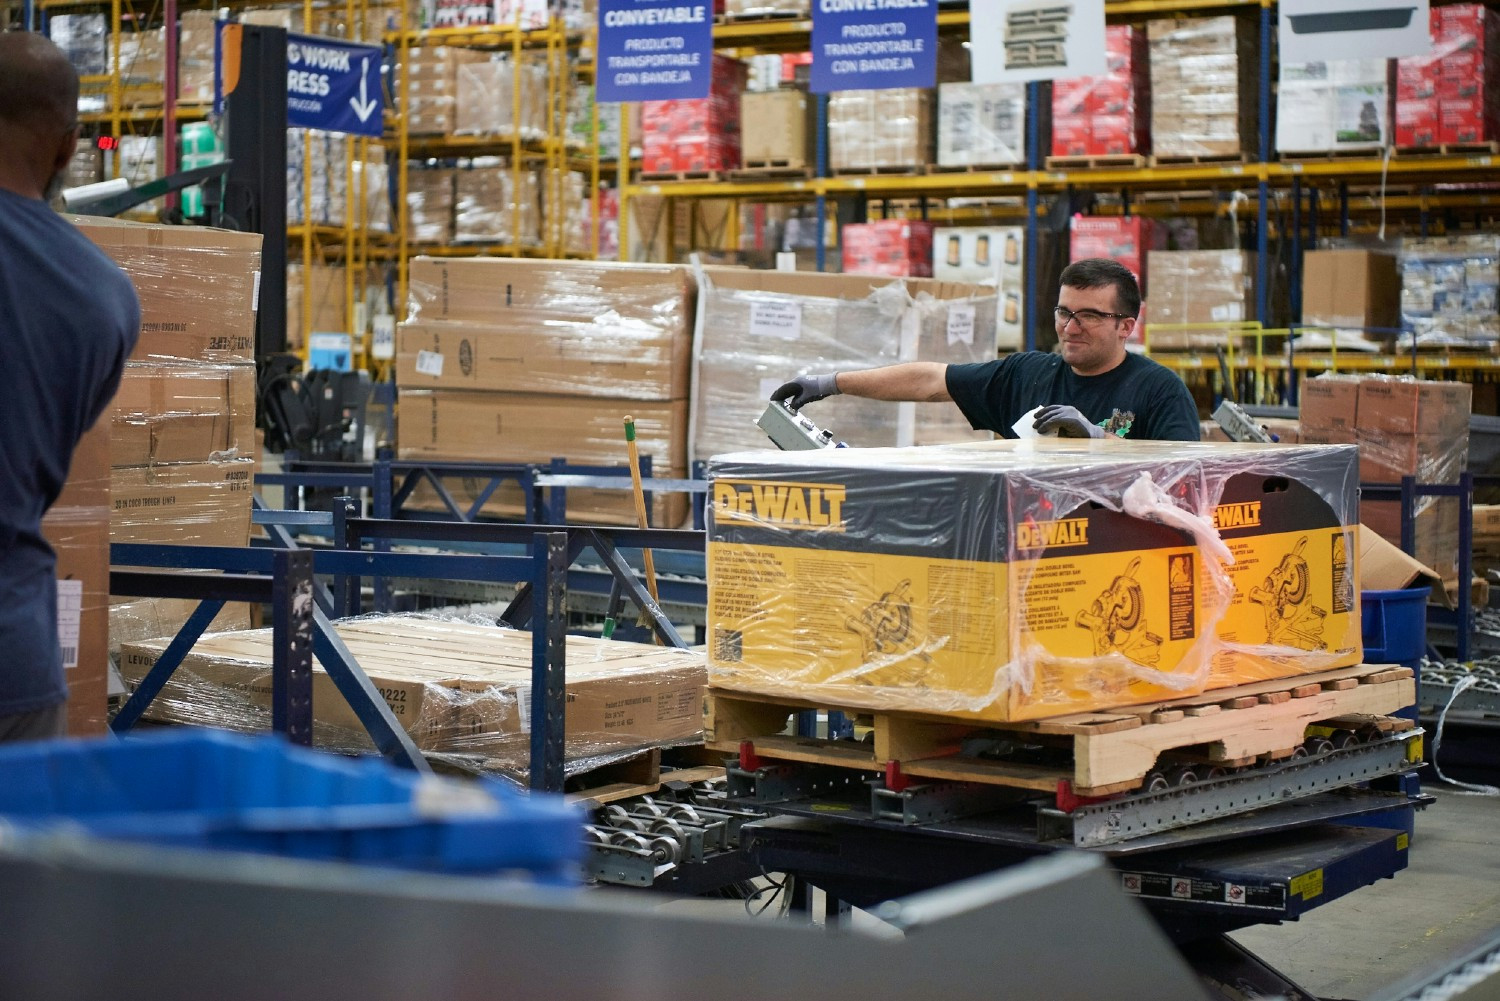 Supply Chain associate using a forklift to move products.